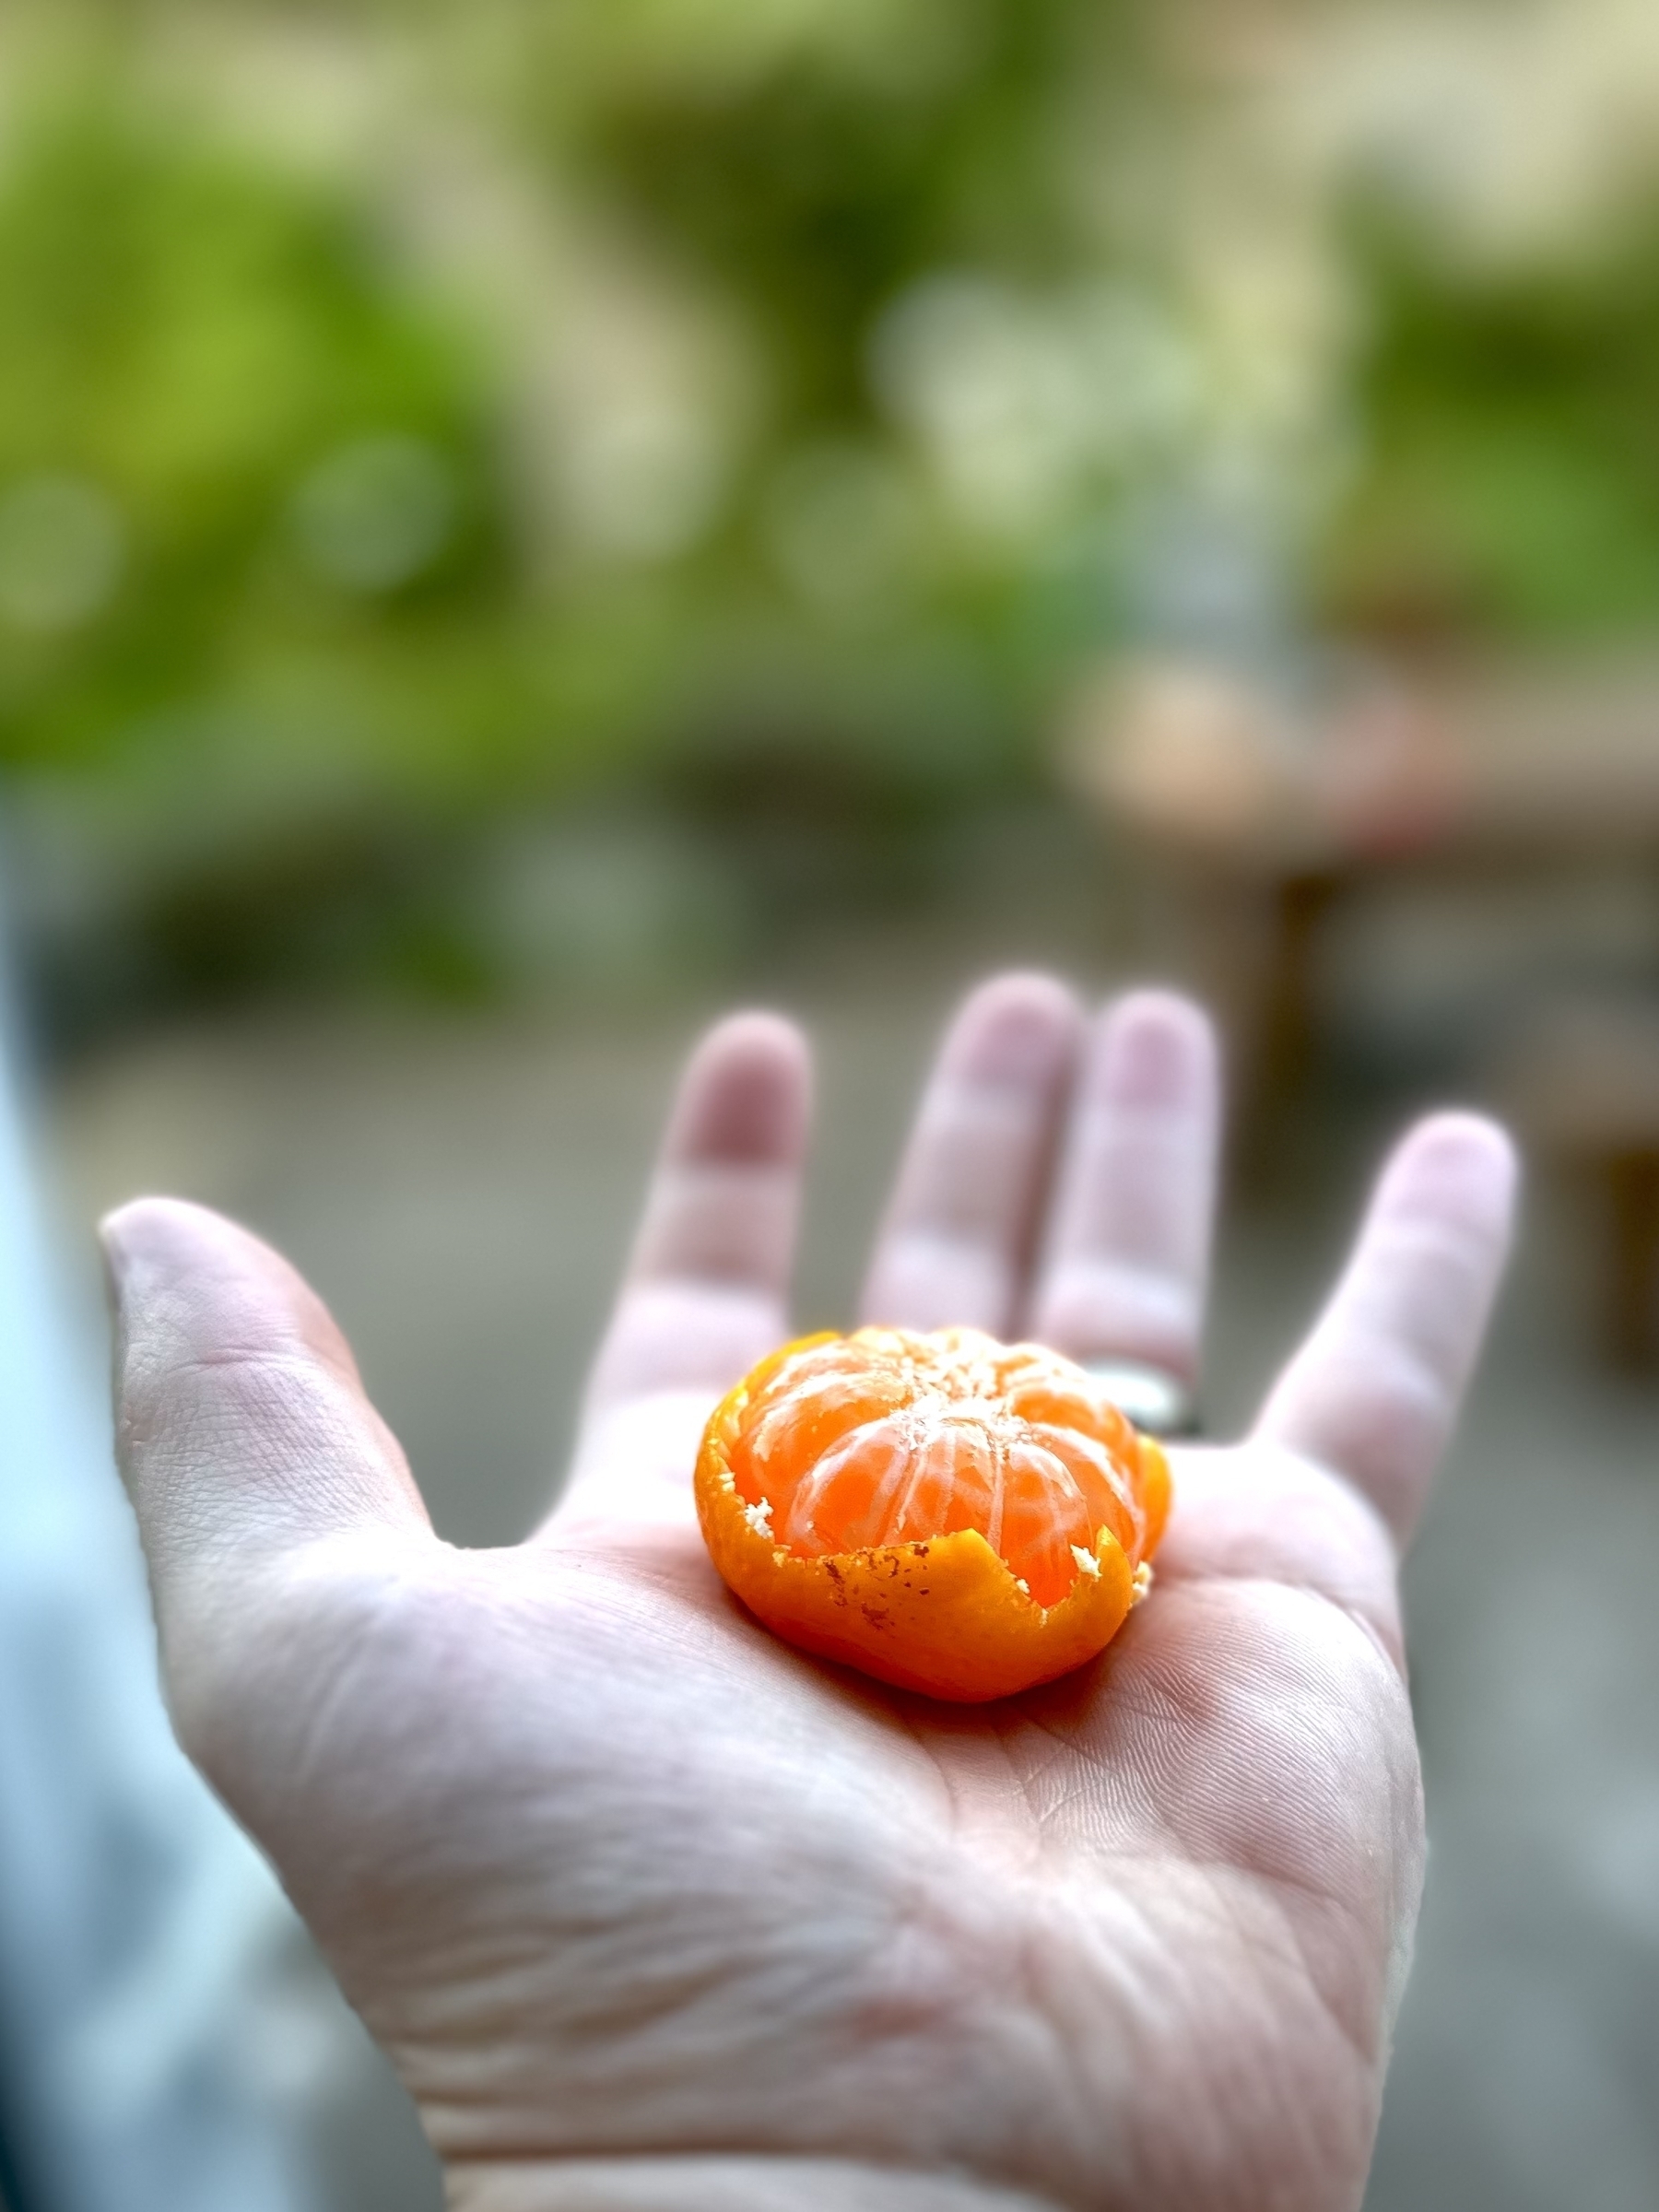 A real looking tangerine actually made of plastic held in the palm of a hand